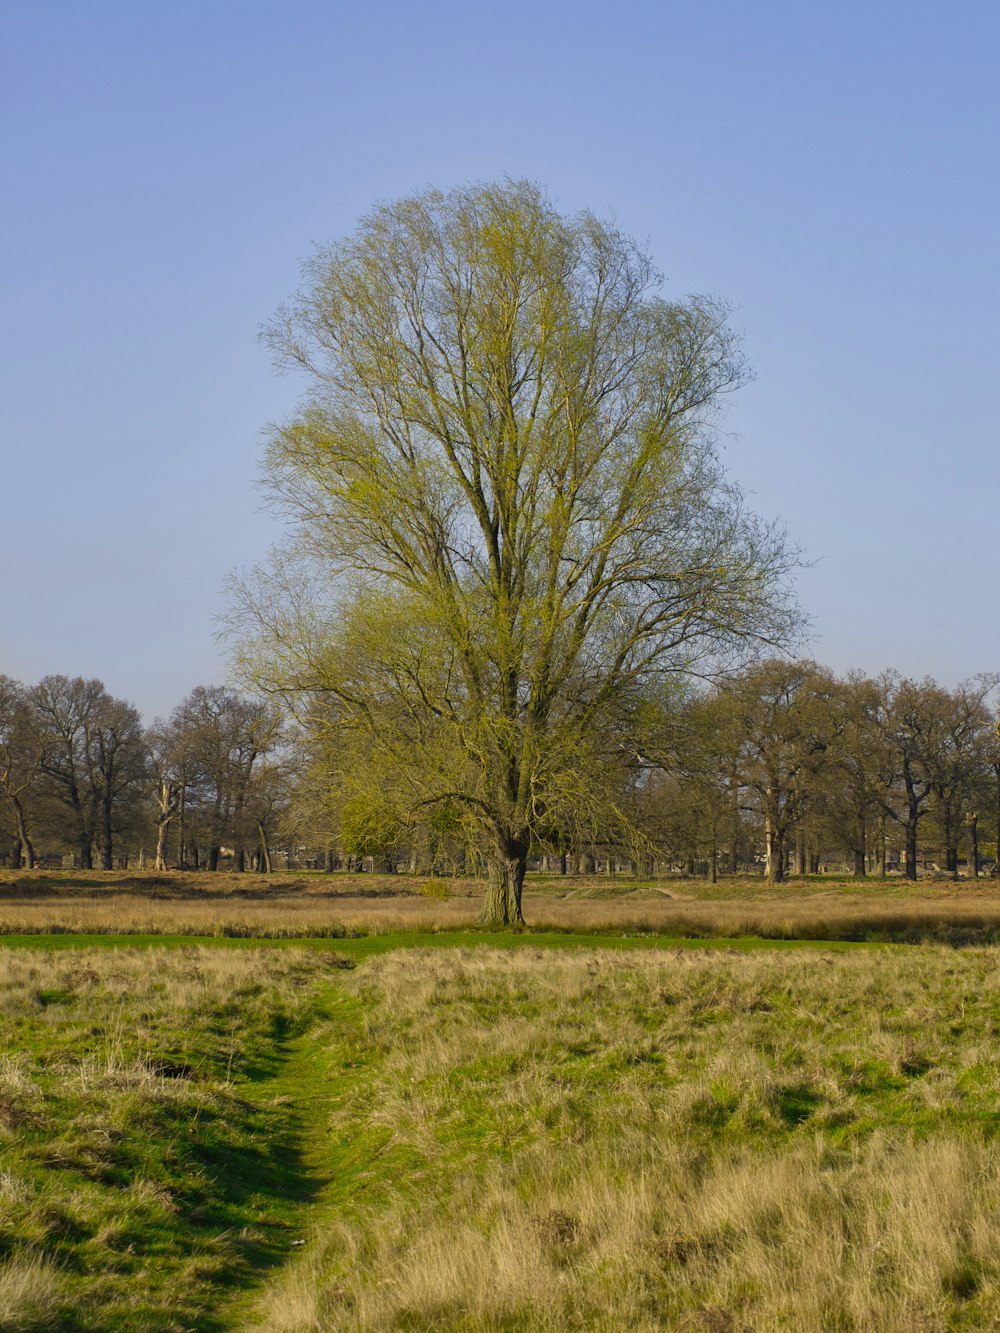 a lone tree in a grassy field with trees in the background